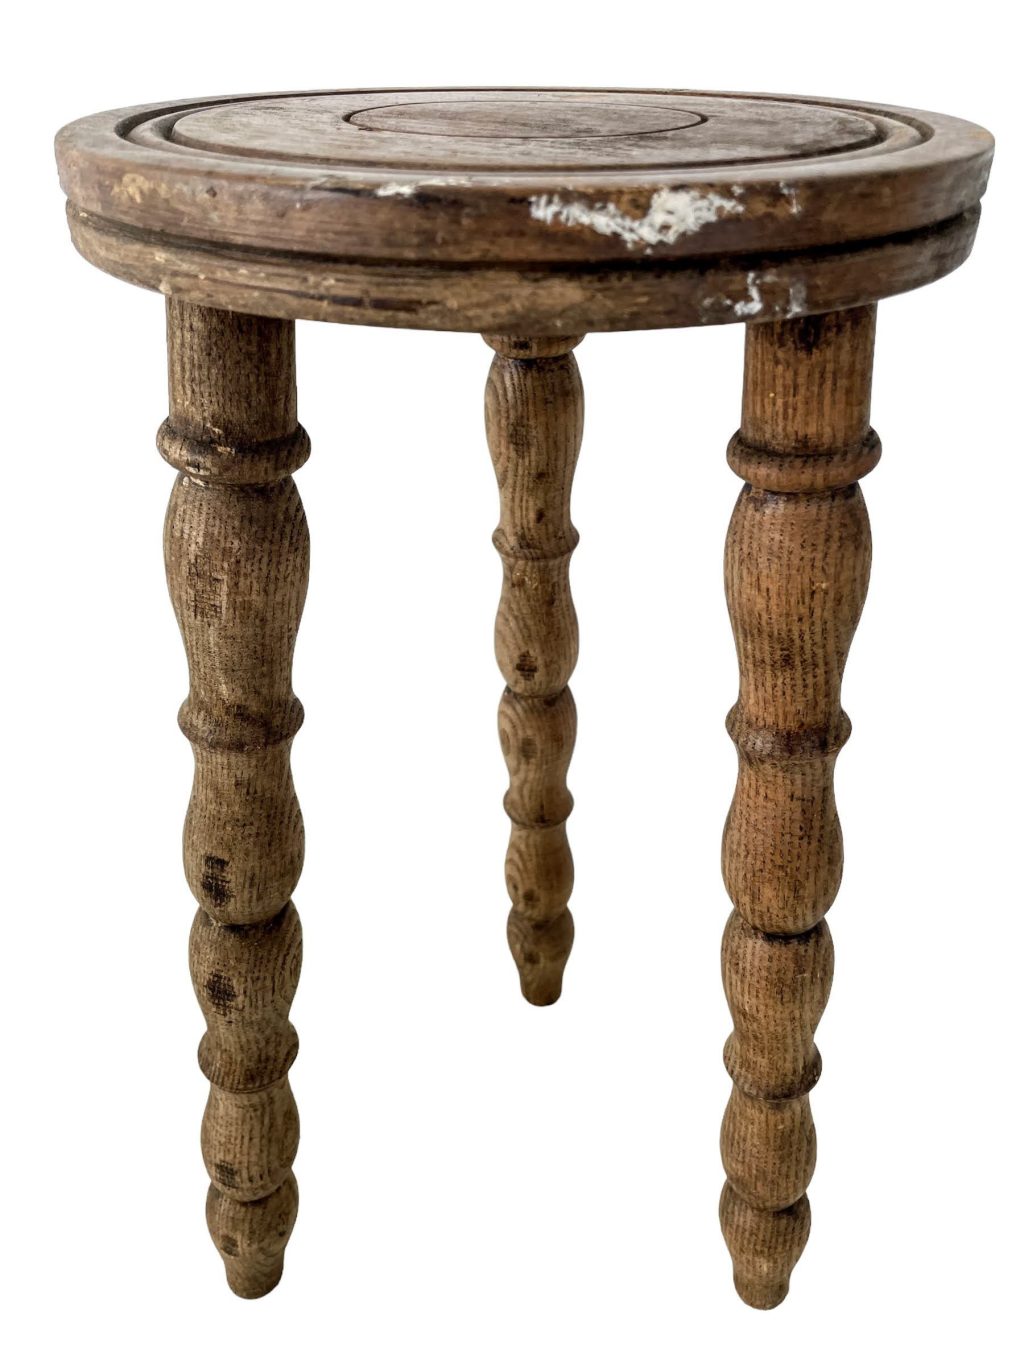 Stool Vintage French Traditional Worn Weathered Milking Stool Small Chair Stand Bobbin Leg Plinth Seating Plant Tabouret c1960-70’s / EVE